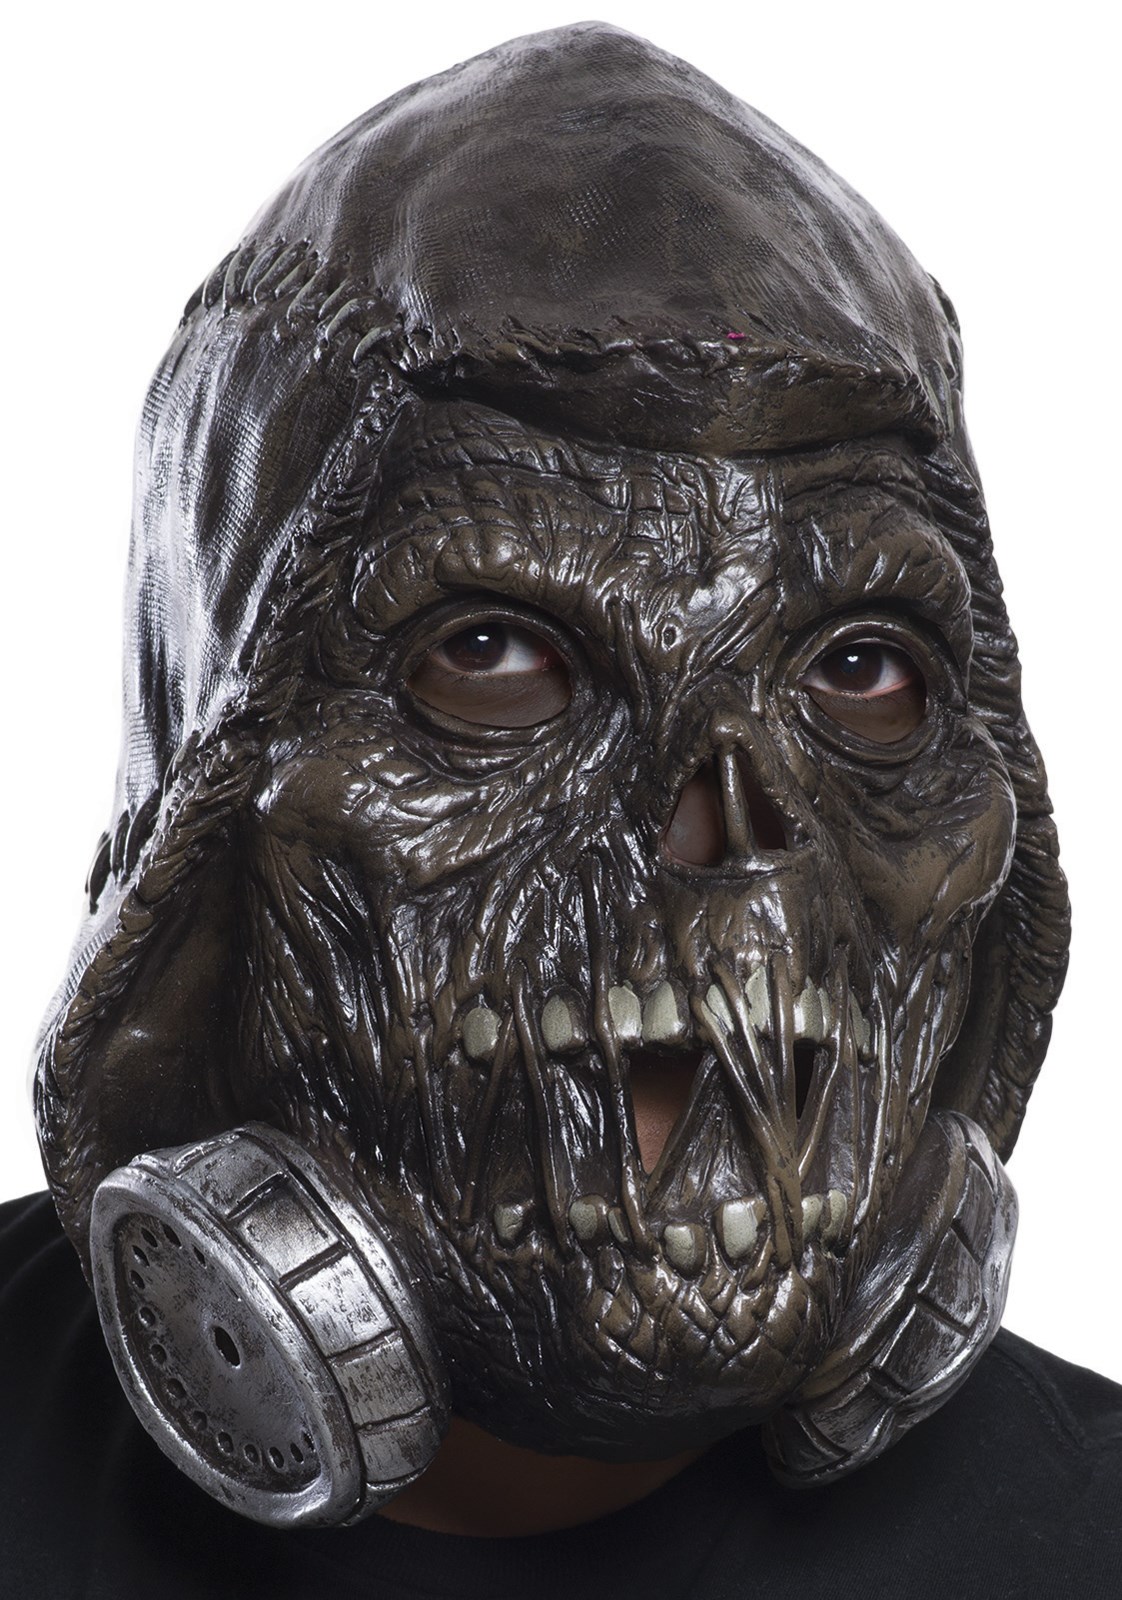 Scarecrow 3/4 Vinyl Mask For Adults